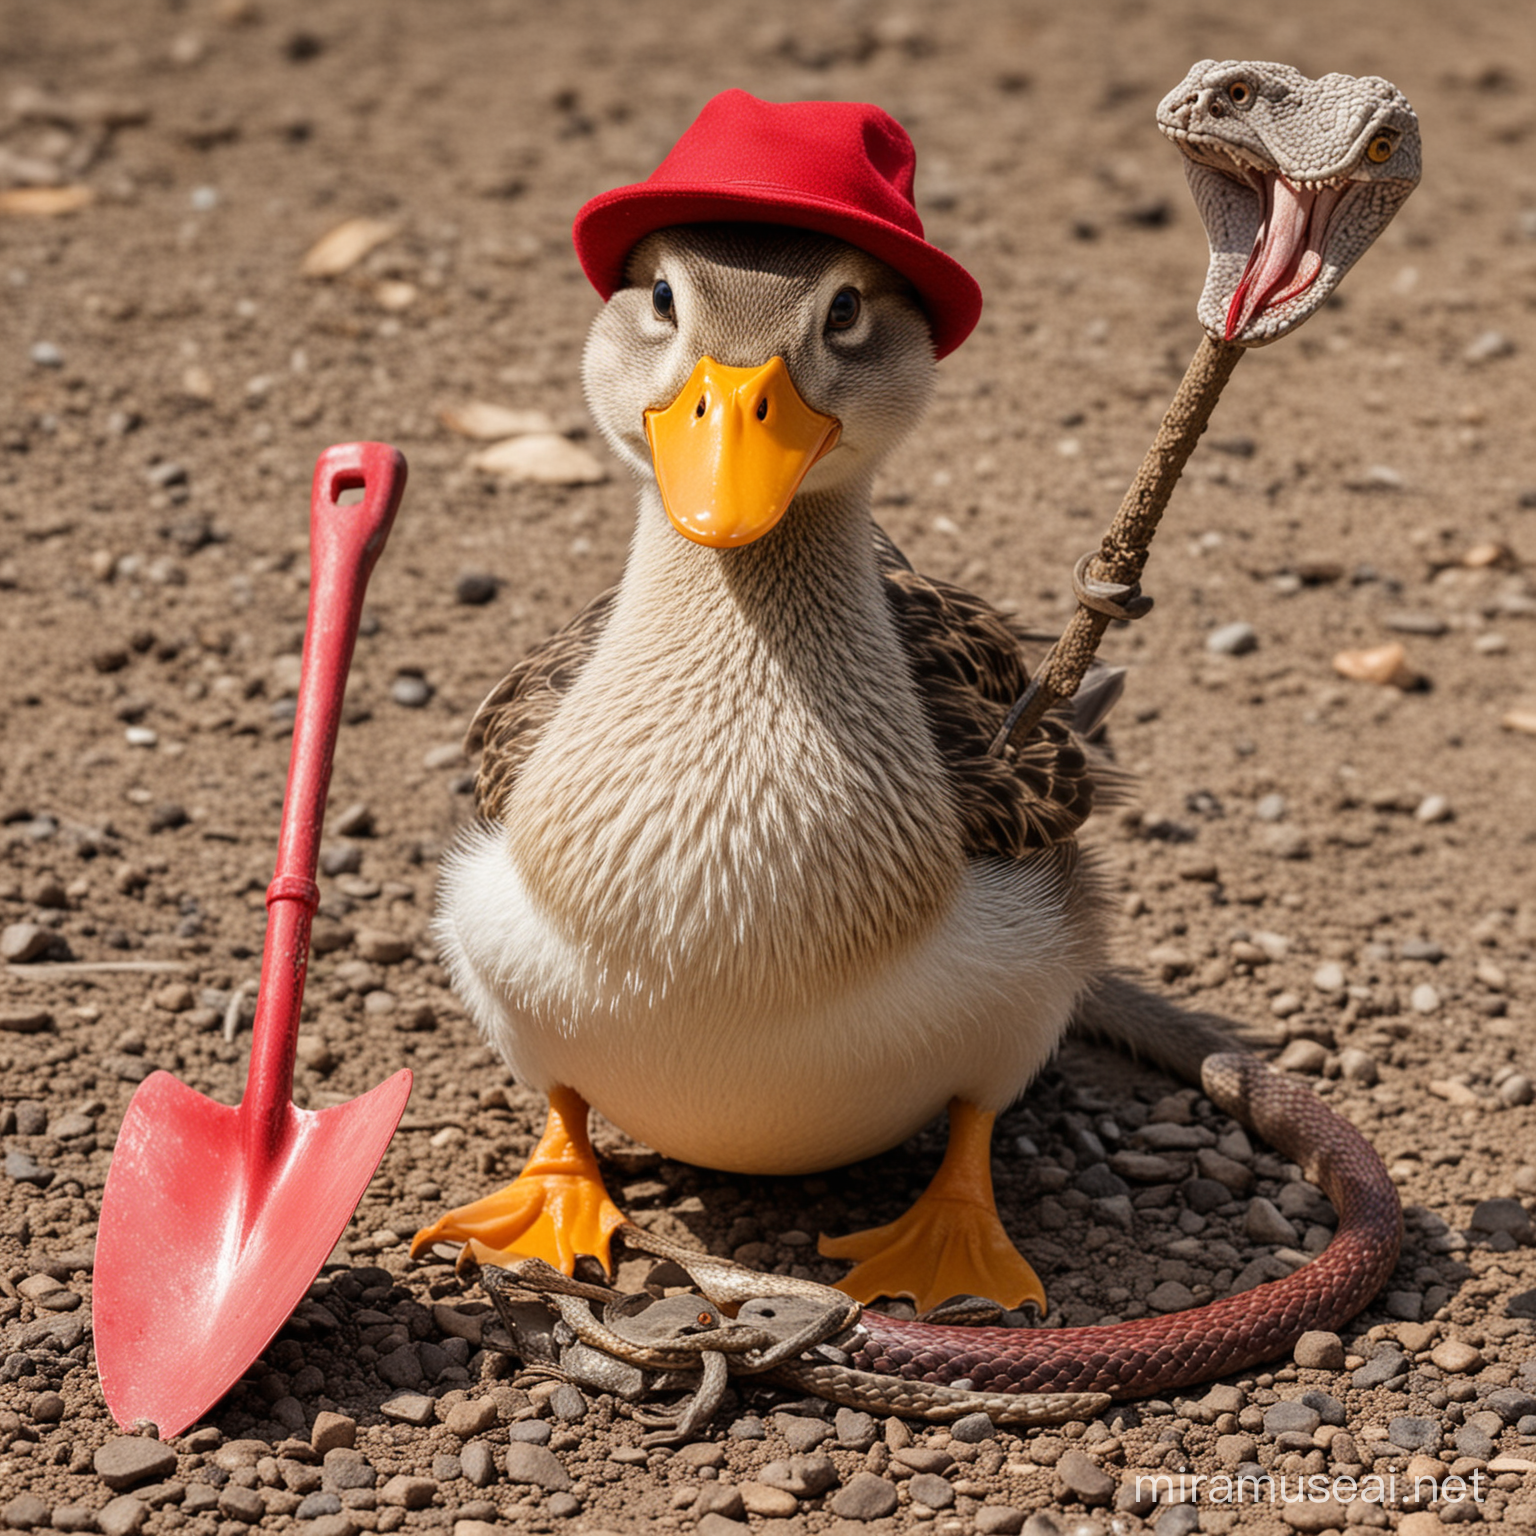 duck with a red hat, holding a shovel next to a dead snake
